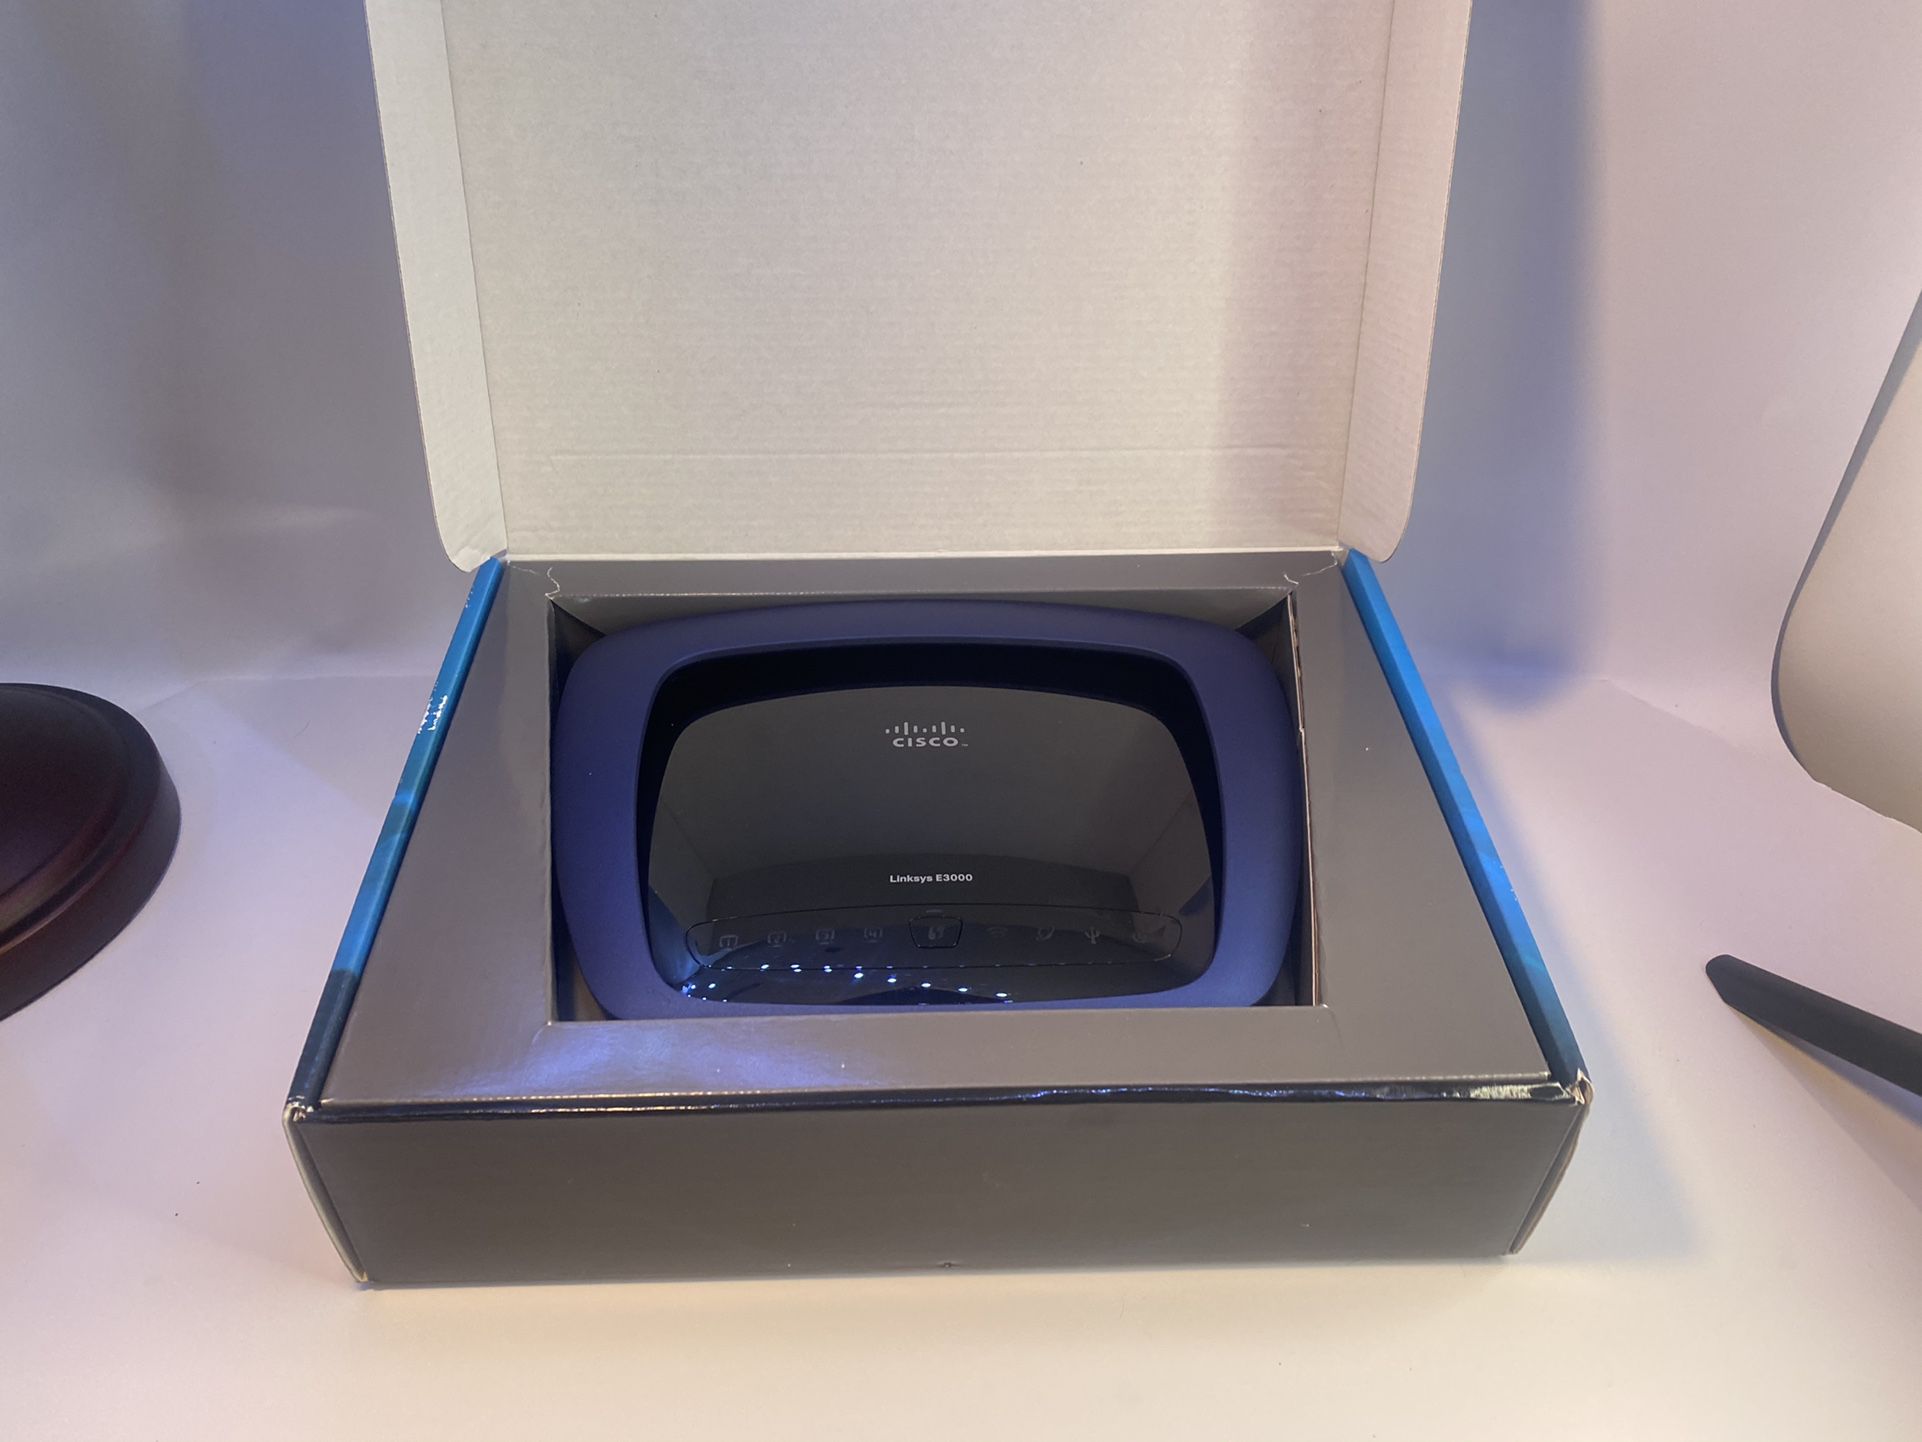 LINKSYS E30000 Wireless N Router